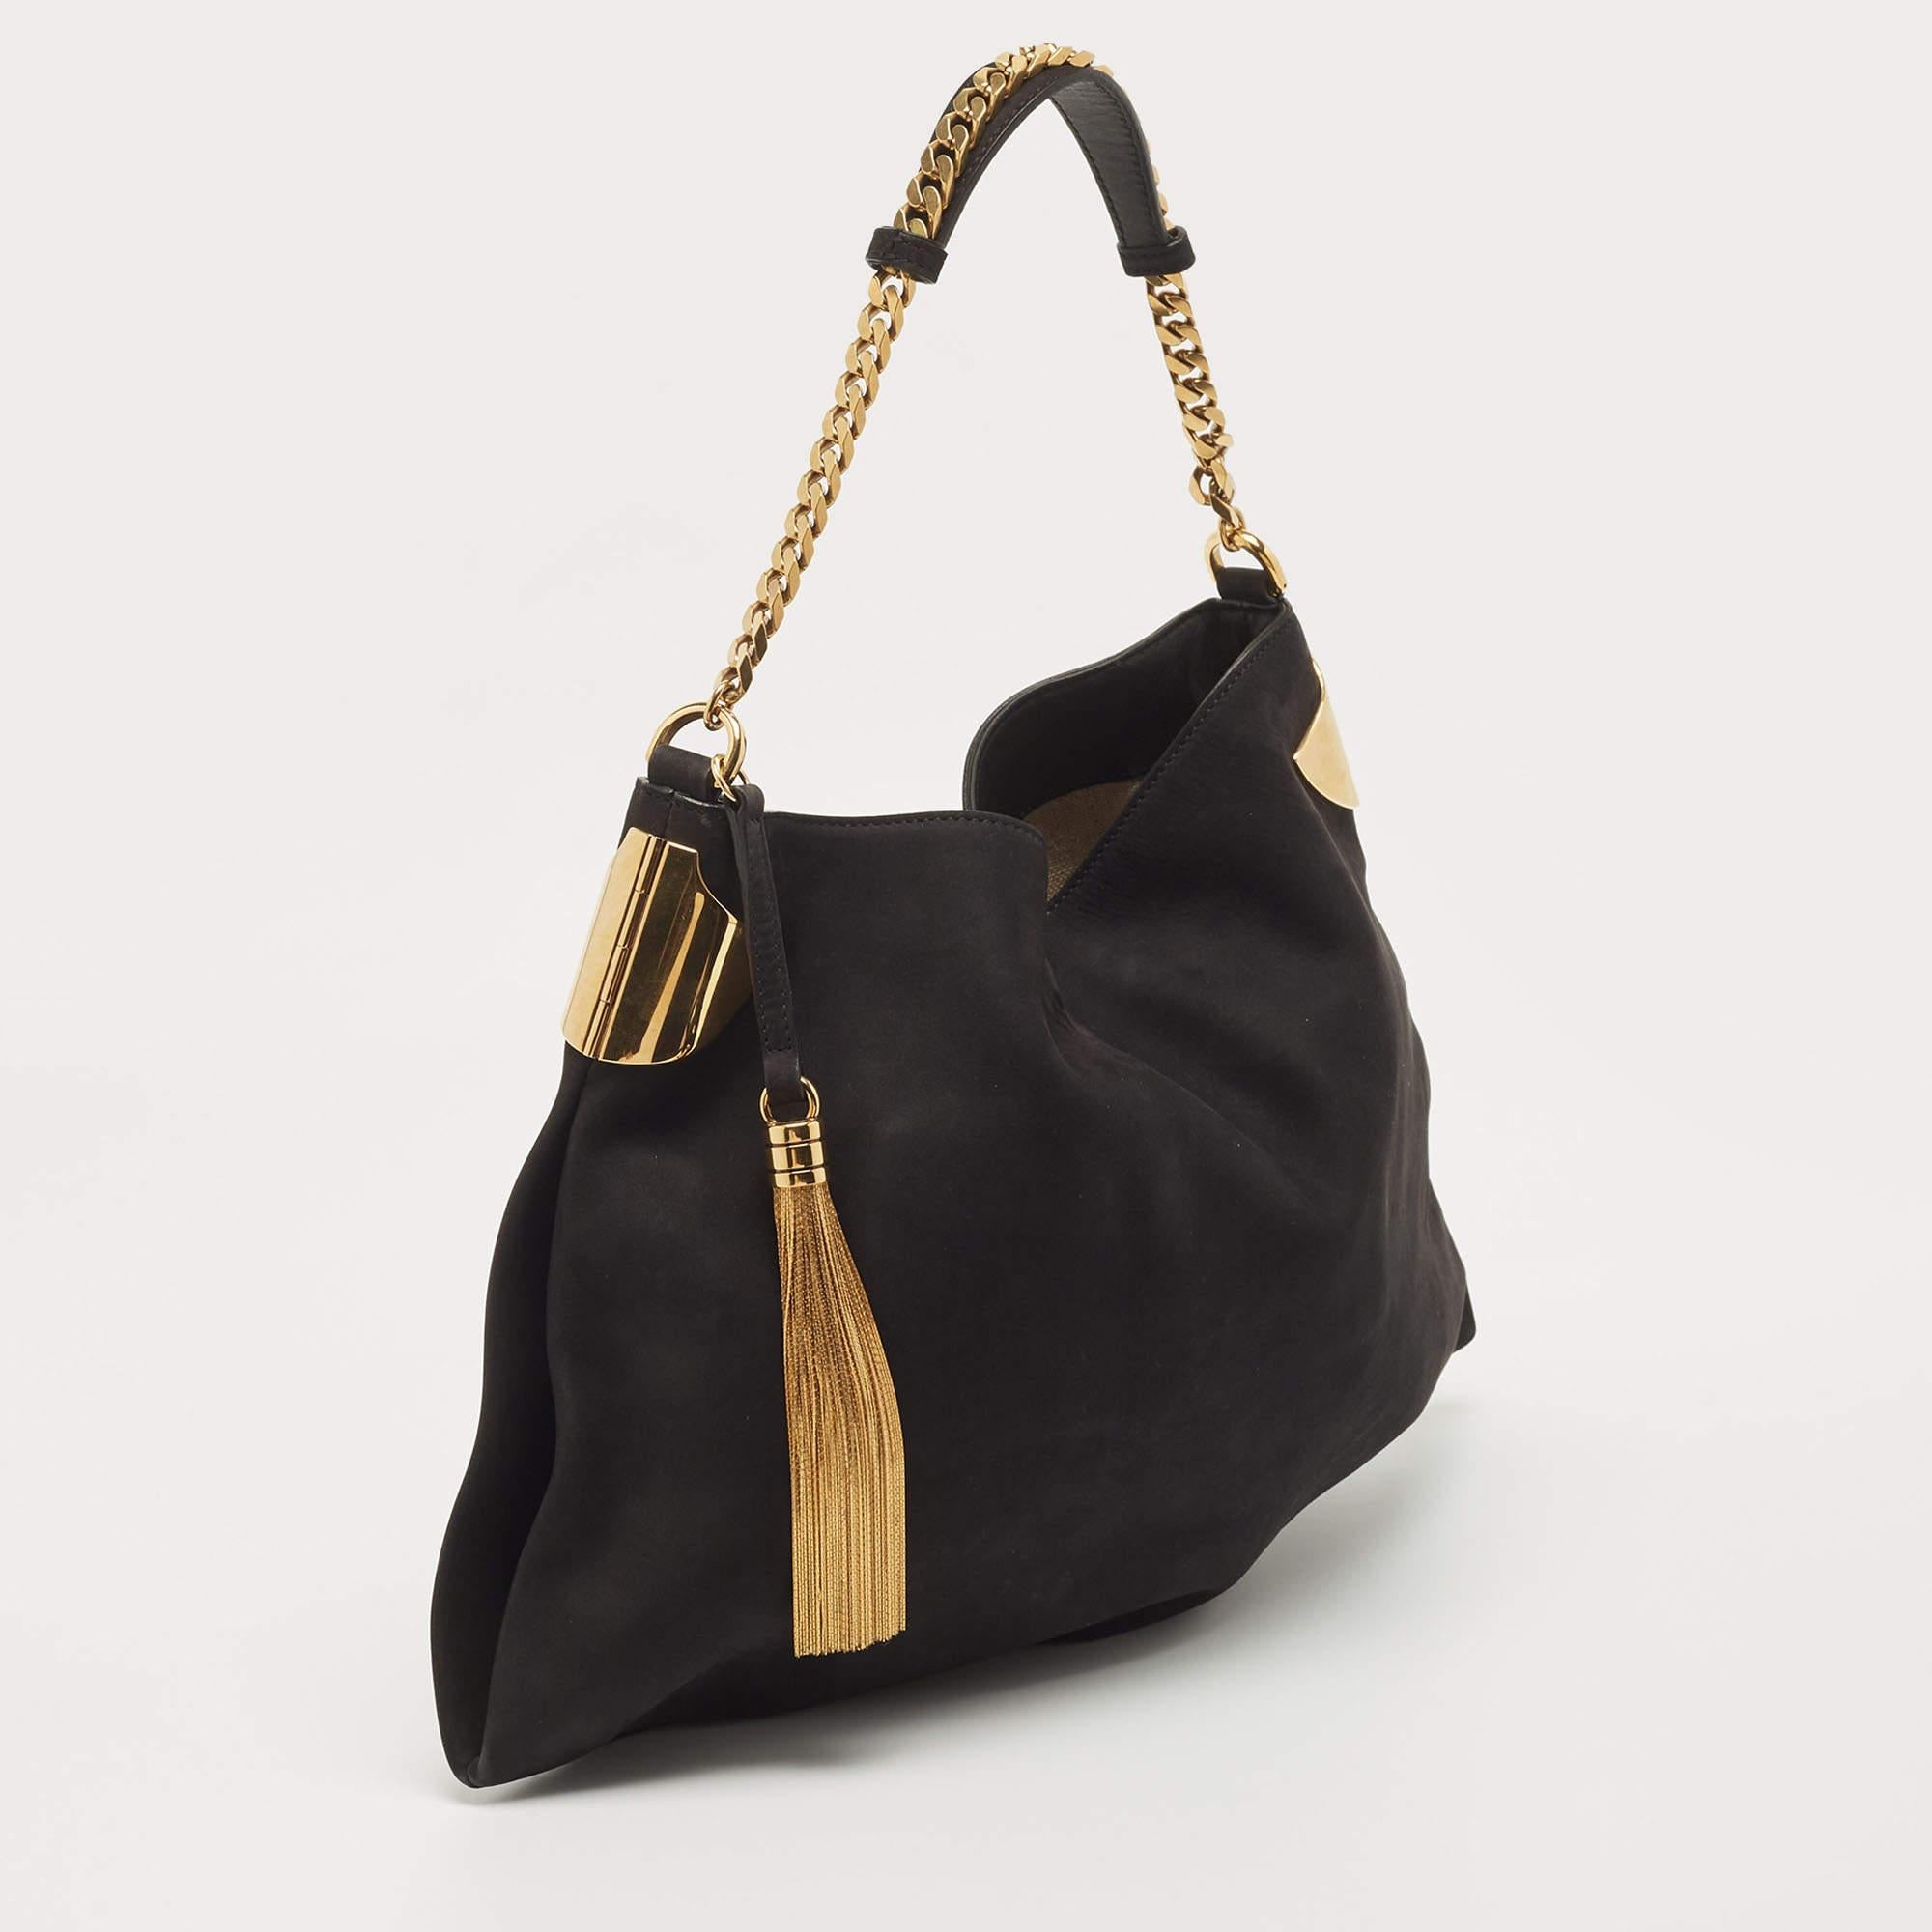 Thoughtful details, high quality, and everyday convenience mark this Gucci 1970 bag for women. The bag is sewn with skill to deliver a refined look and an impeccable finish.

